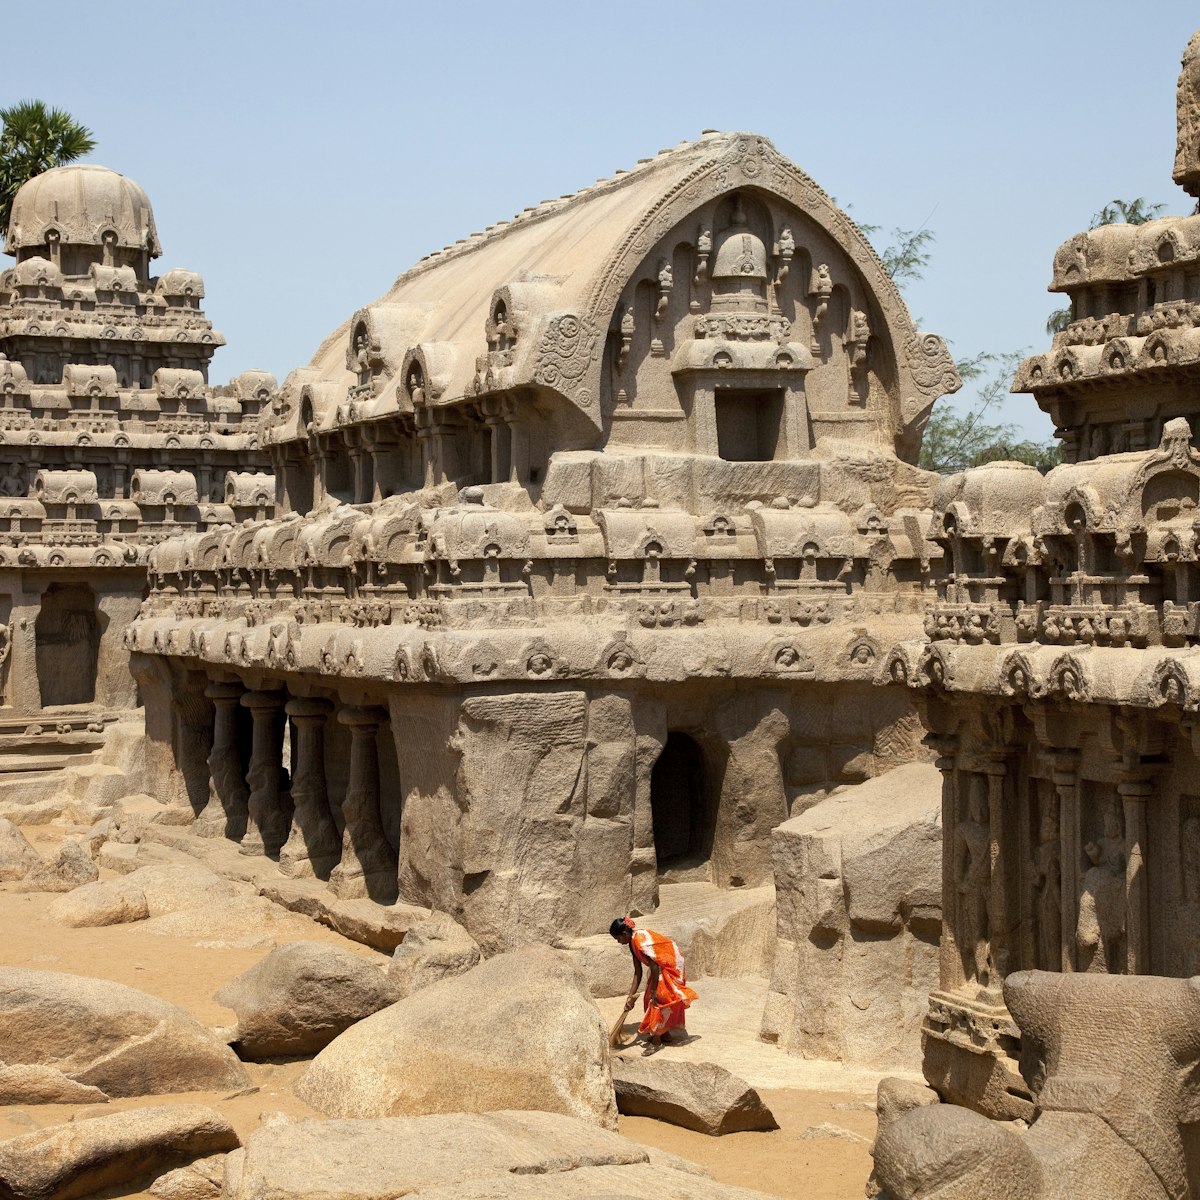 India, Mahabalipuram. The intricately-carved Panchas Rathas, part of the Five Rathas Temple, is carved entirely out of the granite bedrock.